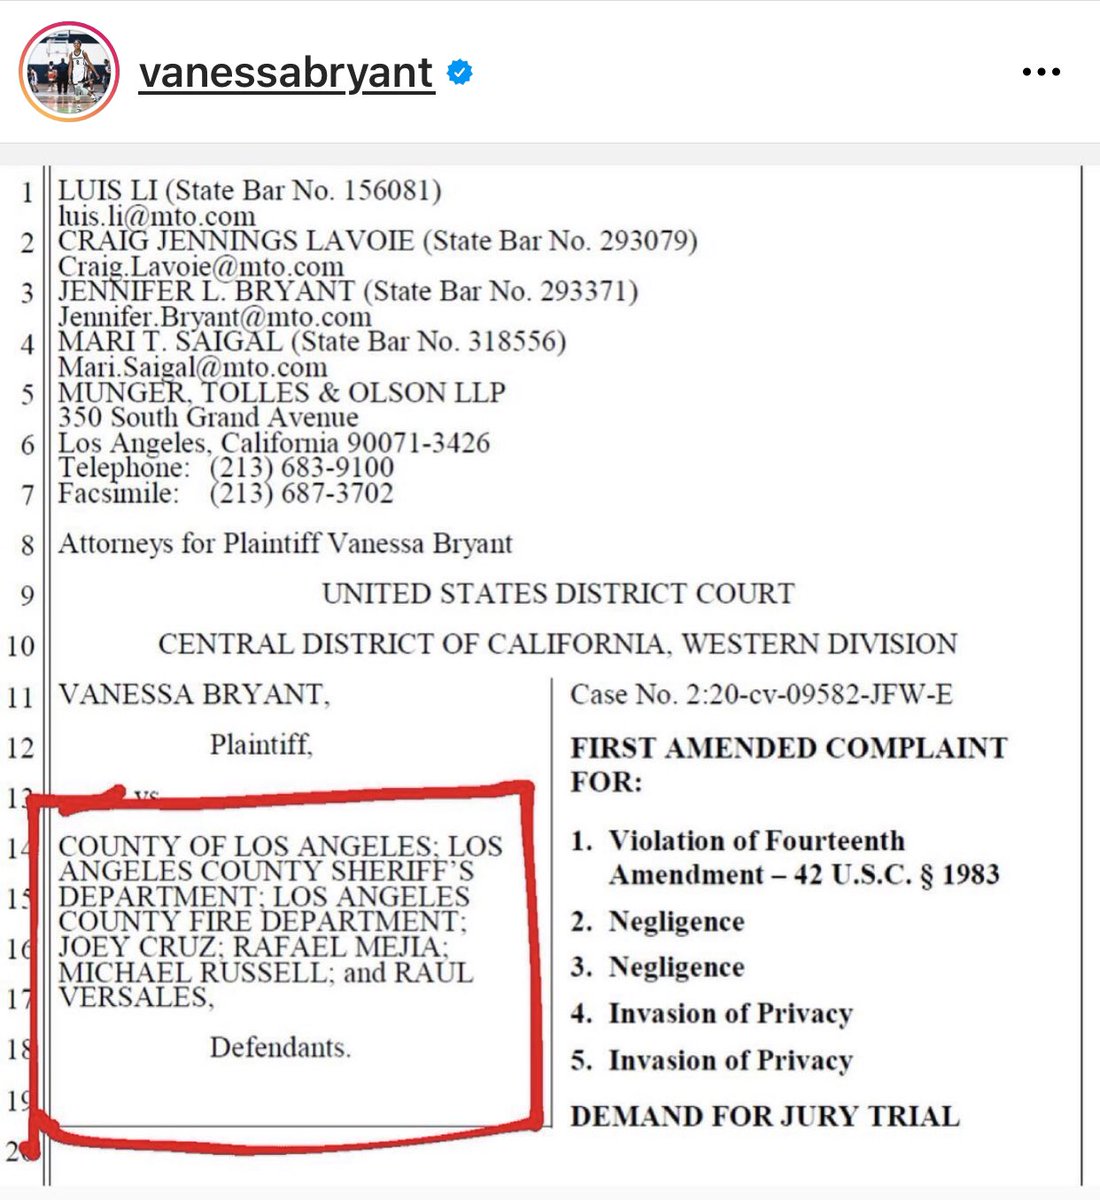 Vanessa remains on the offensive after taking to Instagram to blast Sheriff’s deputies who allegedly shared graphic photos from the helicopter crash that killed Kobe, Gianna and 7 others.Here are some of her IG posts detailing the names/claims of deputies within the department.